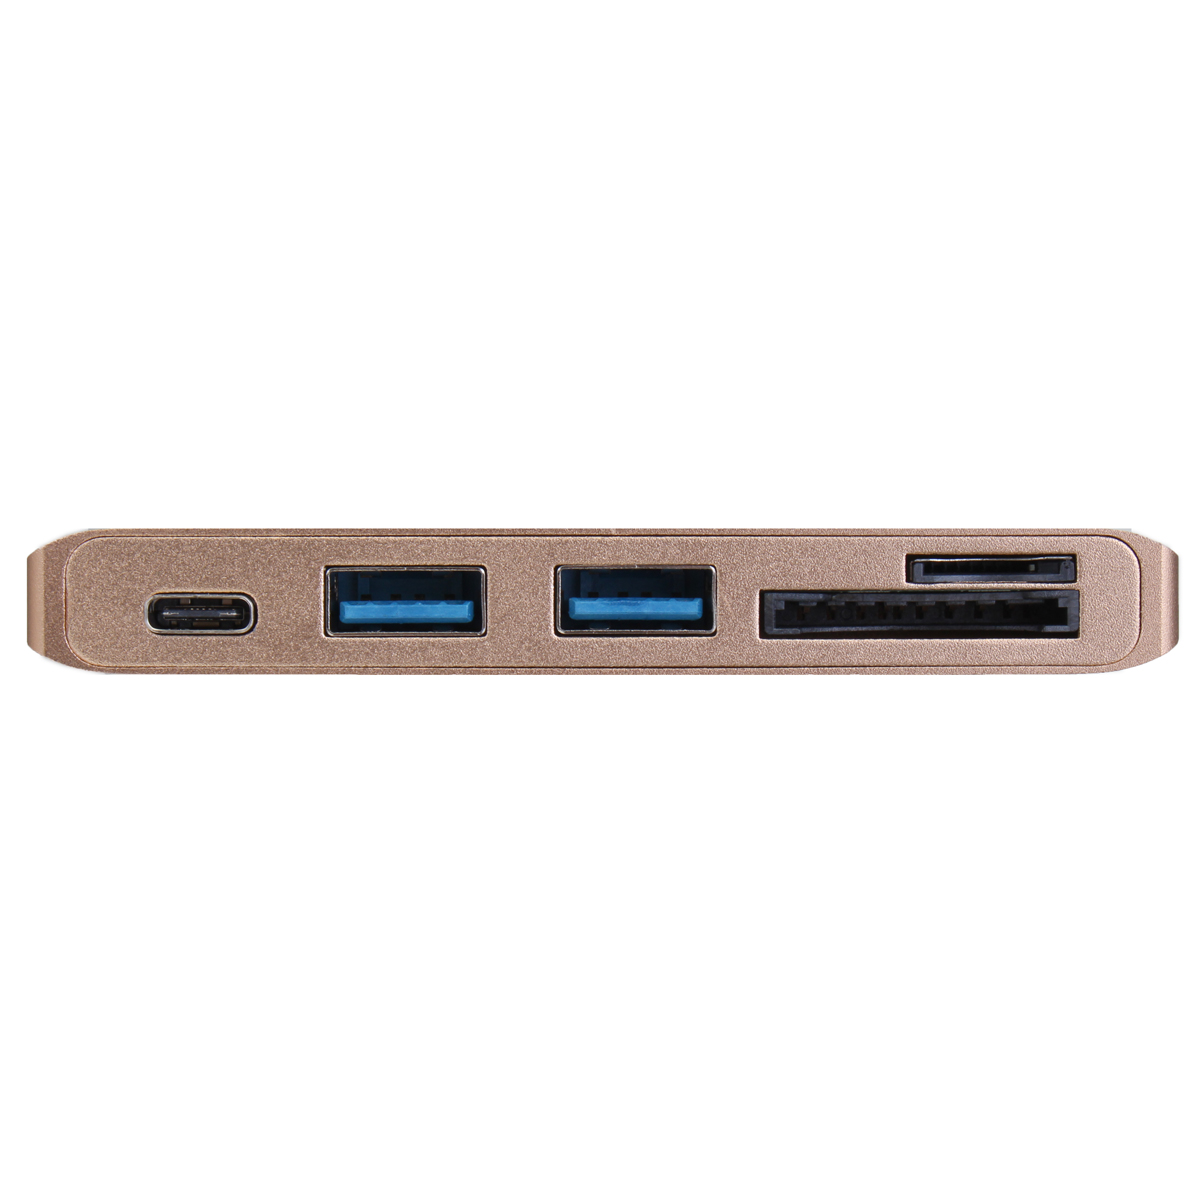 Multifunction USB Hub Type-C to Type-C USB 3.0 2Ports TF SD Card Reader for Laptop PC 71